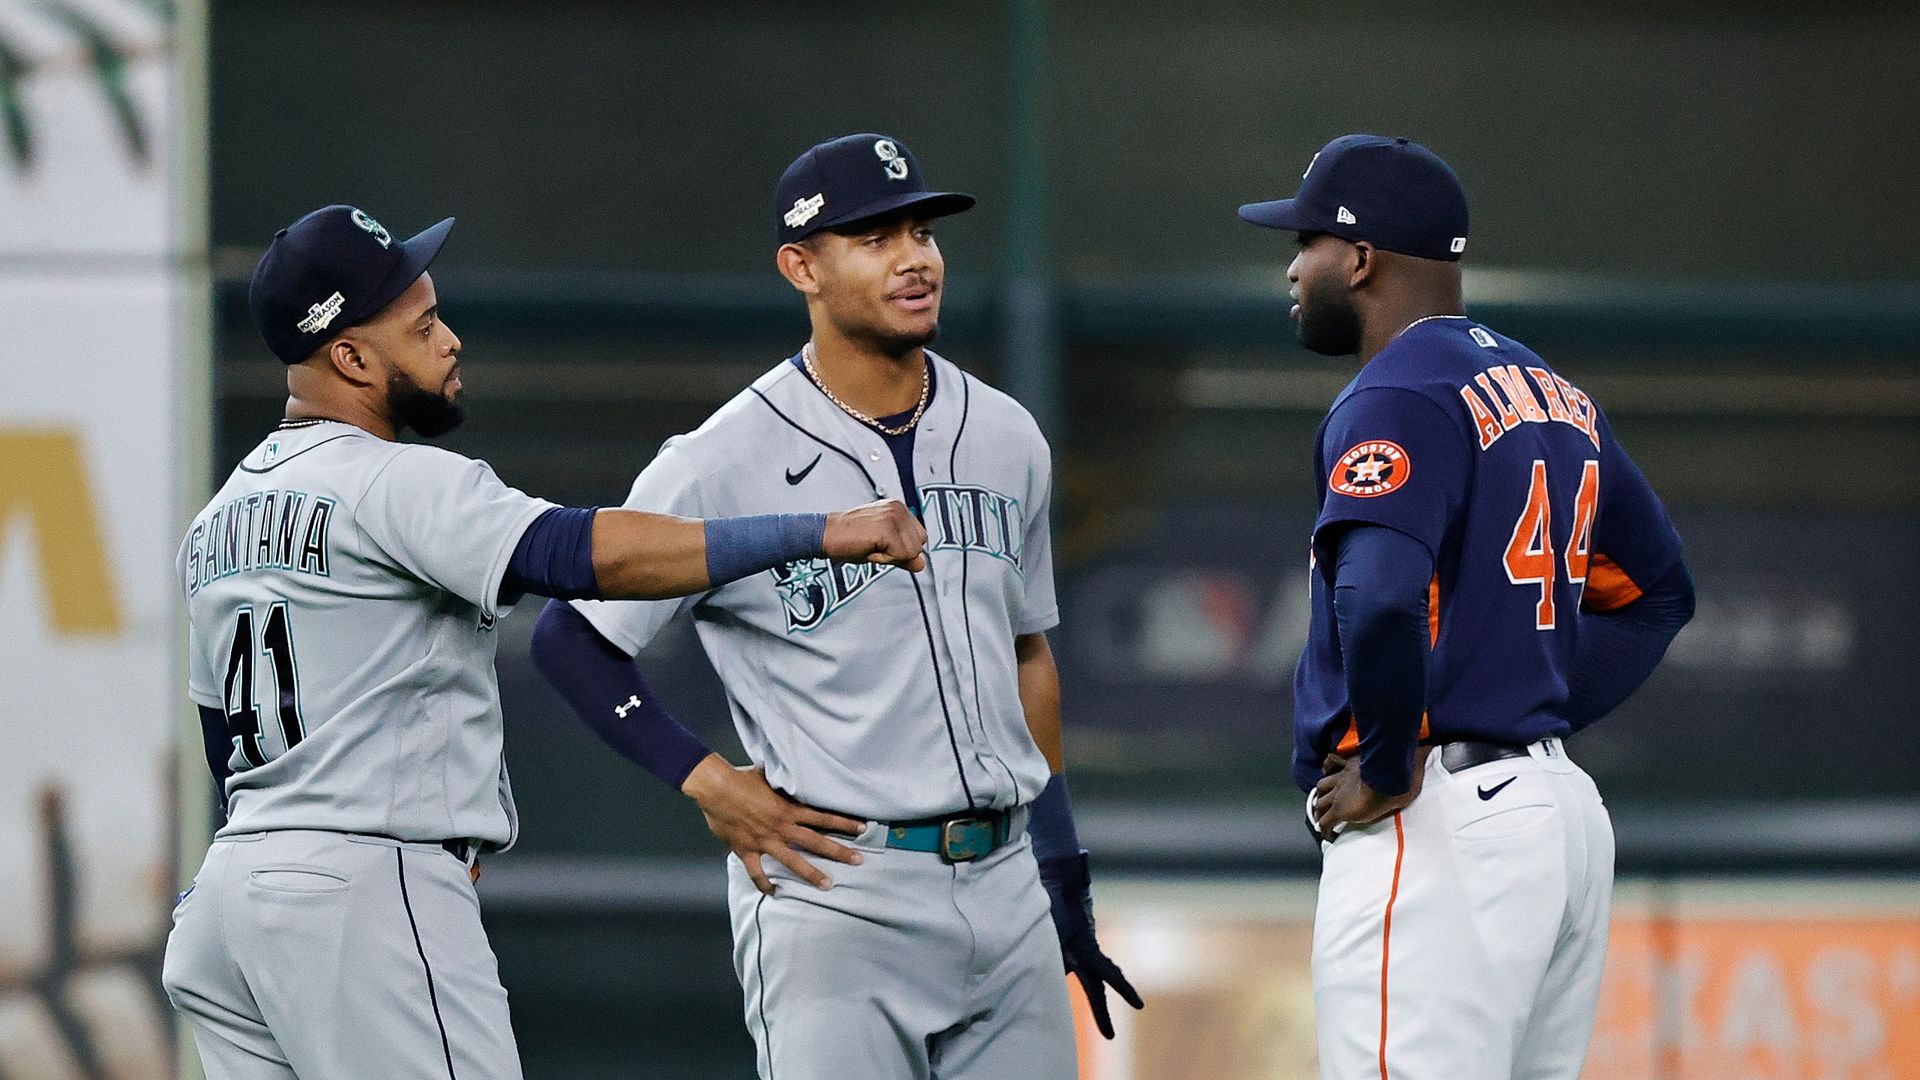 Carlos Santana #41 of the Seattle Mariners, Julio Rodriguez #44 and Yordan Alvarez #44 of the Houston Astros talk before the game in the Division Series at Minute Maid Park.